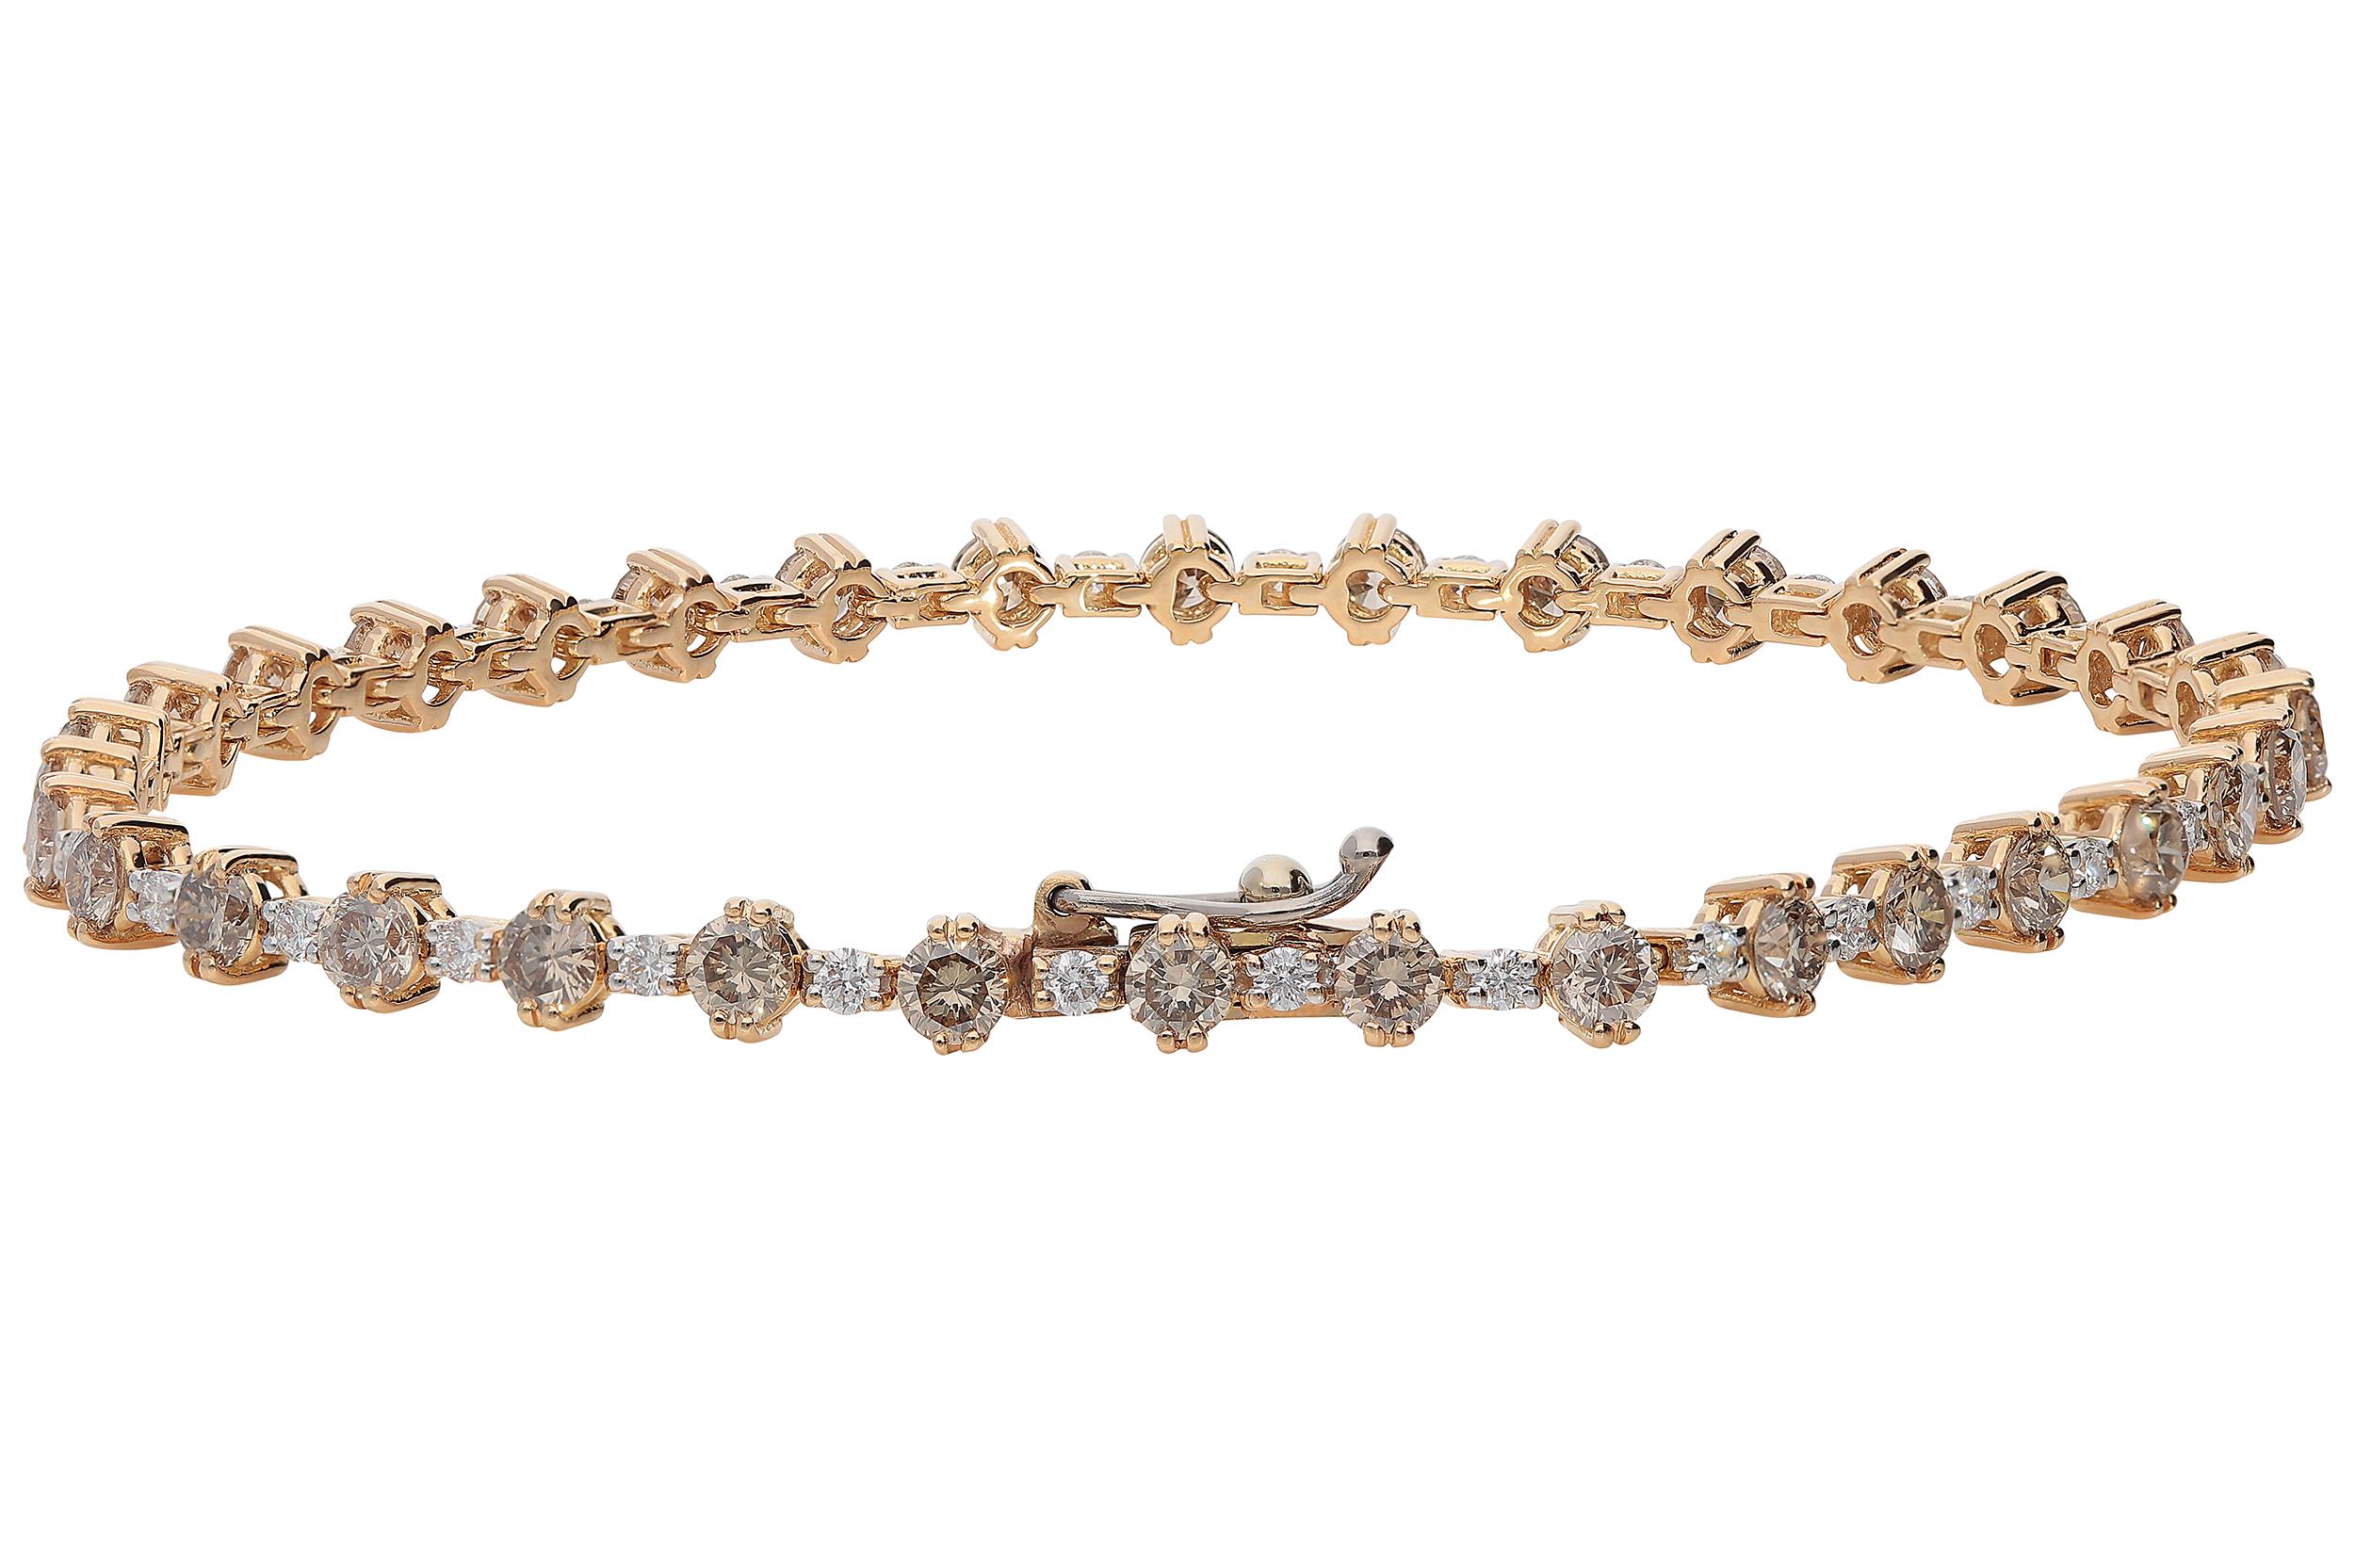 Stylish tennis bracelet with 3,01 carats of brown round brilliant diamonds and 0,56 carat of white round brilliant diamonds color G clarity VS, alternating on the length of 17,20 centimeters. The weight of 18kt pink gold is 7,00 grams. Safety eight